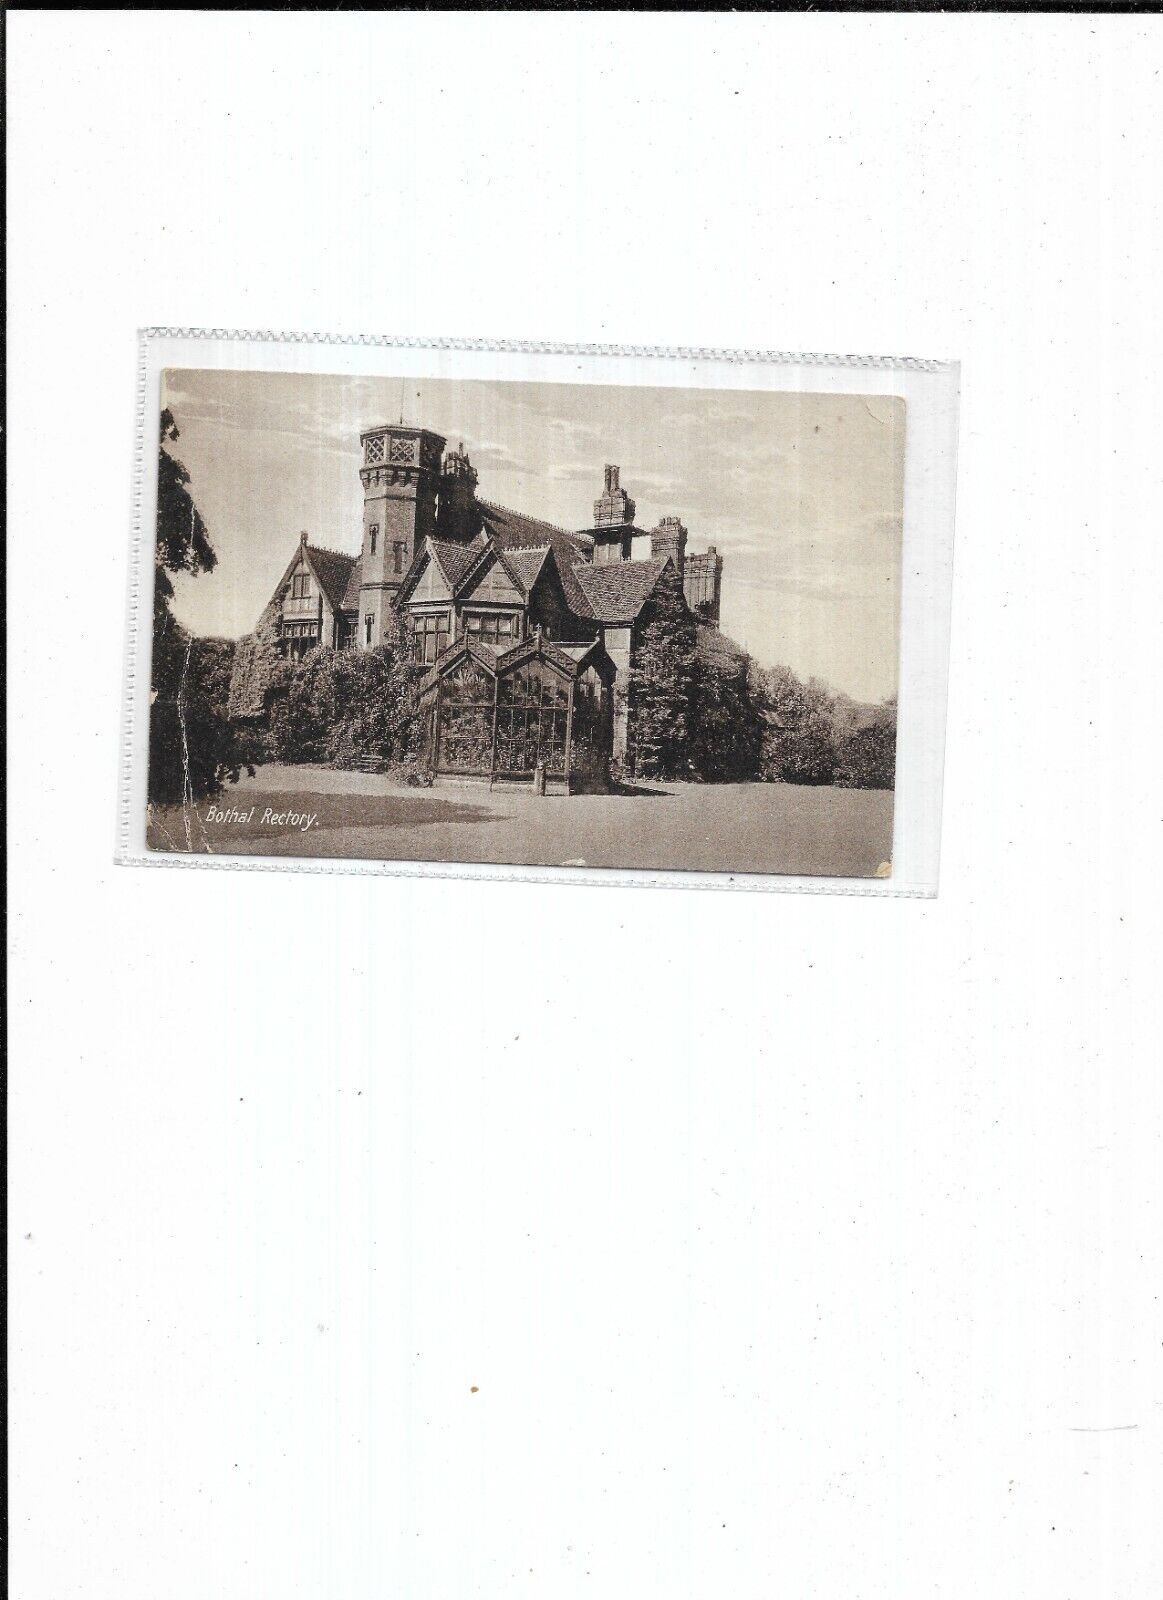 House Clearance - Northumberland Service "Bothal Rectory" Postmarked 1947